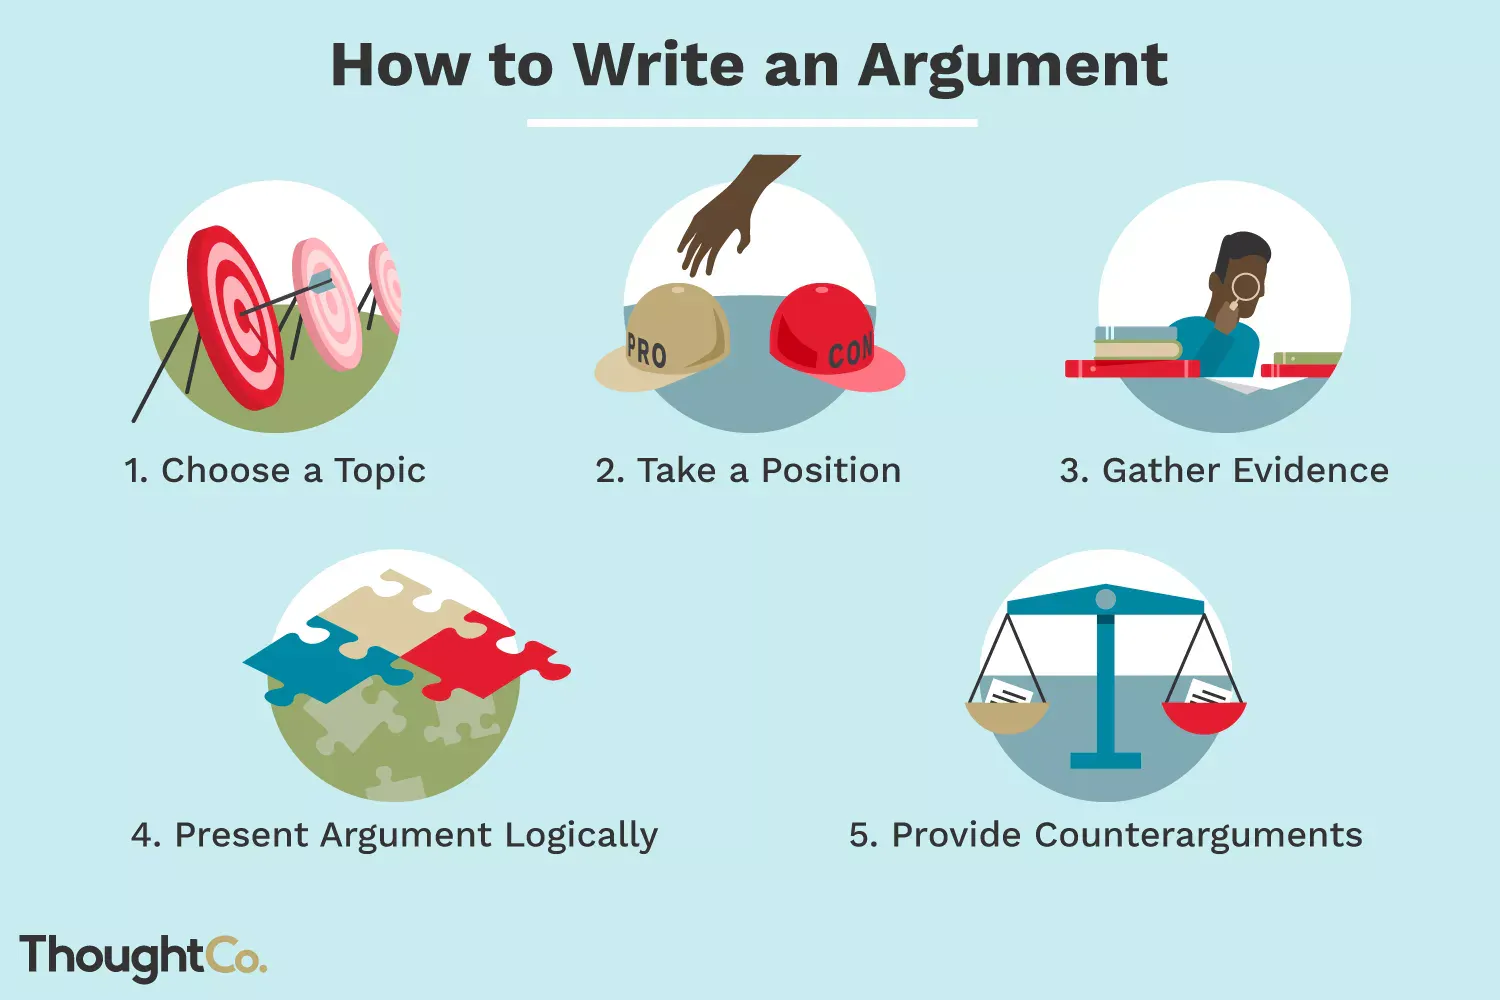 How to Write an Argument